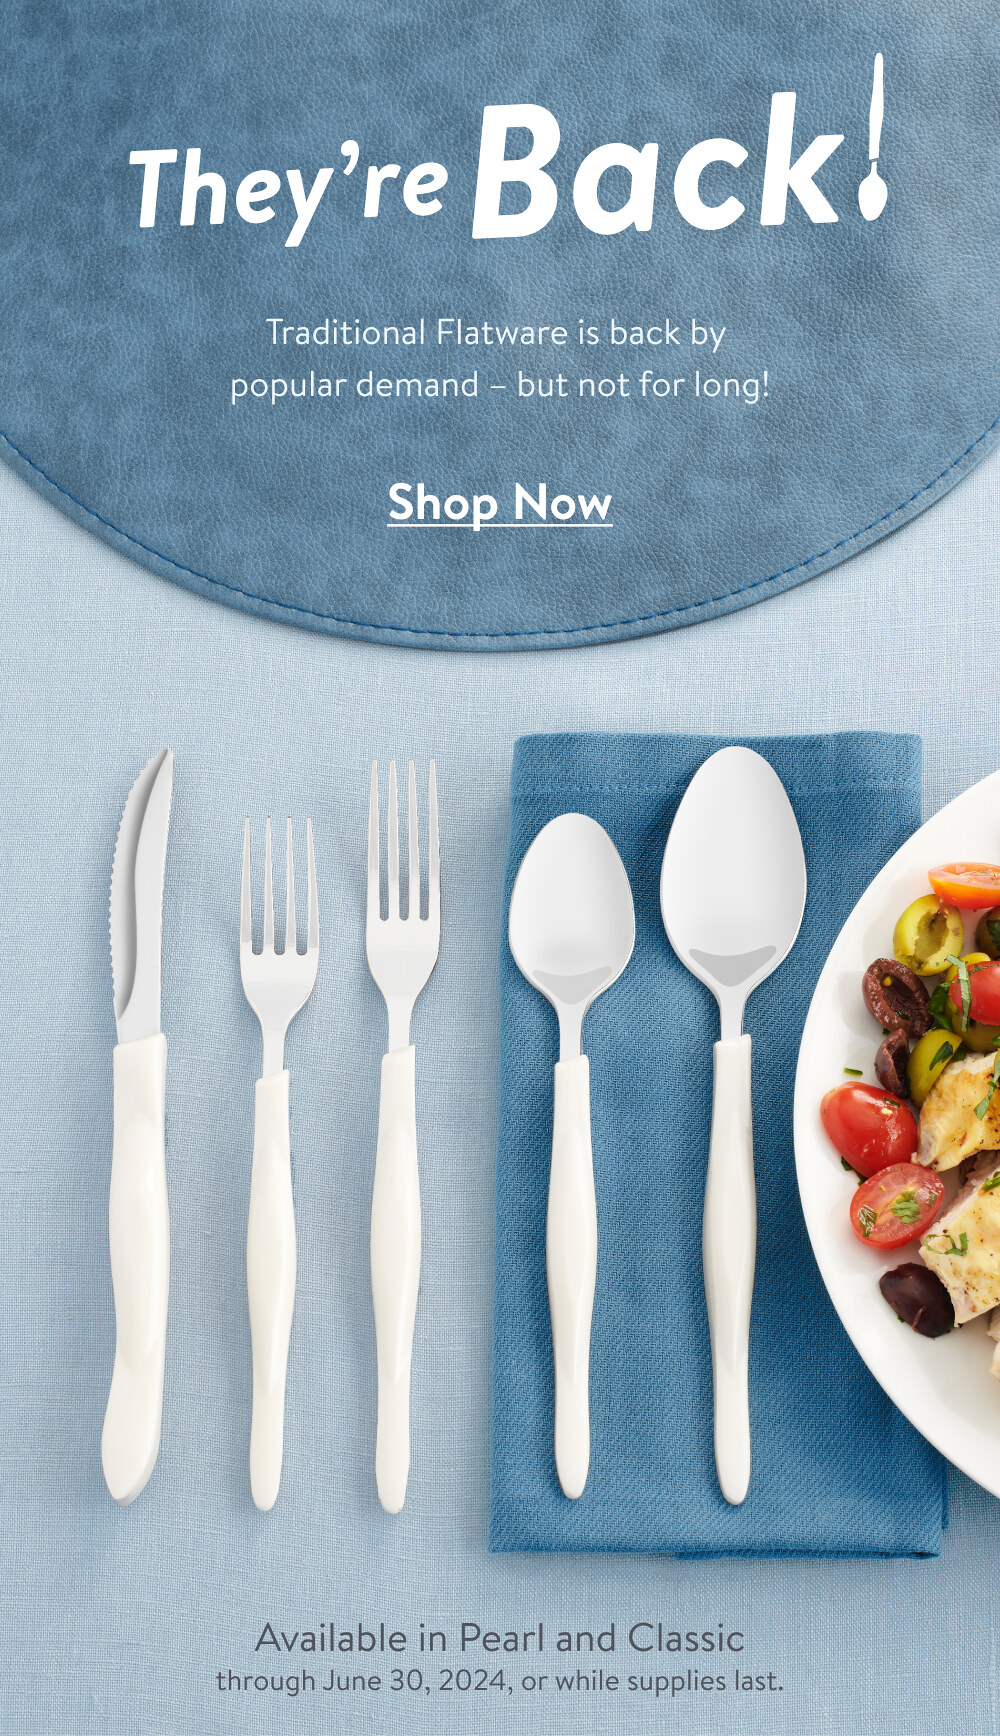 They're back!Traditional Flatware is back by popular demand - but not for long!